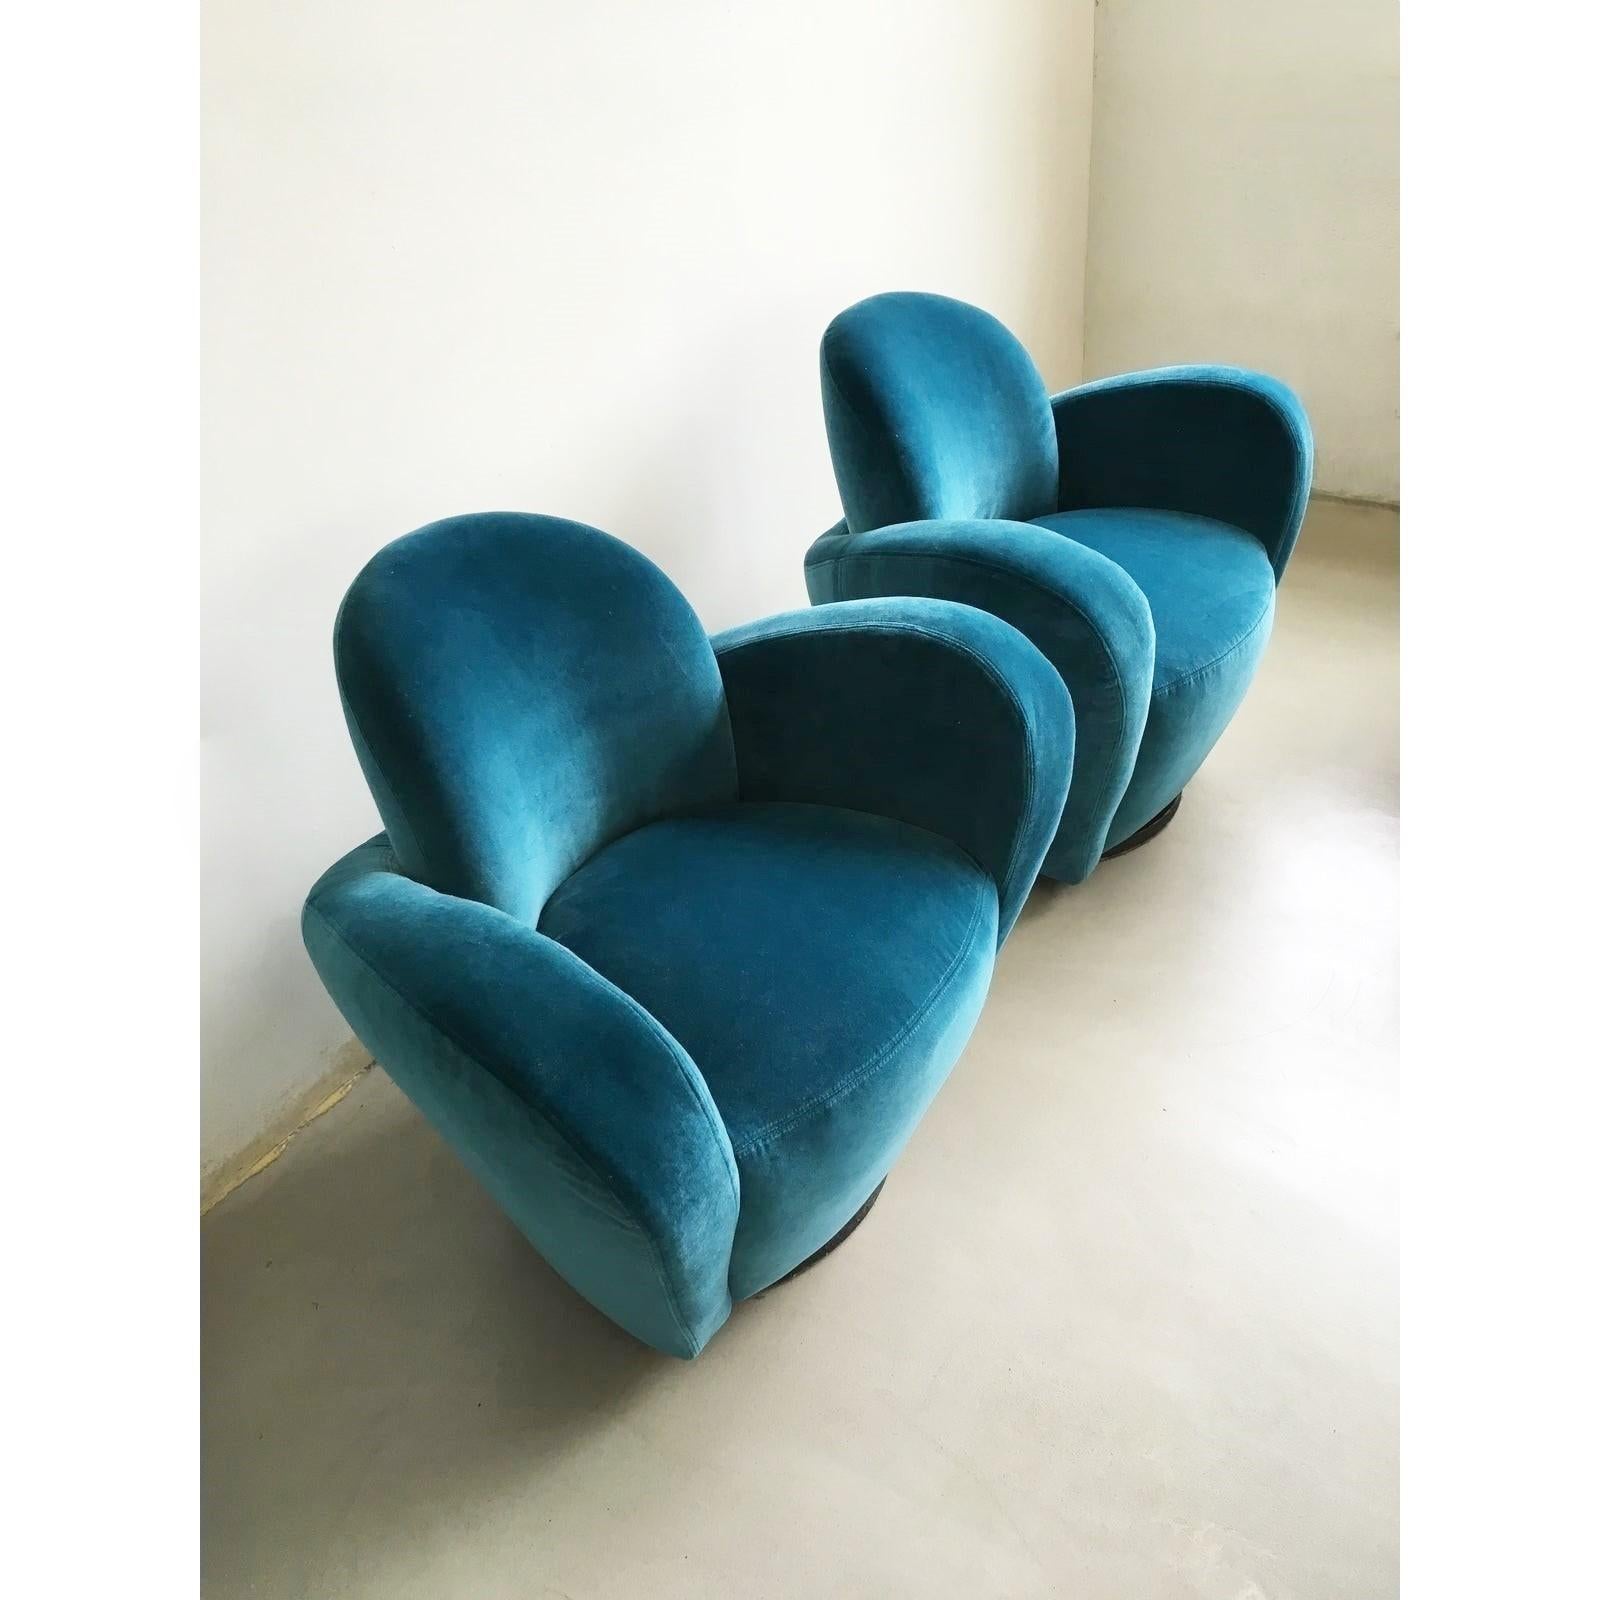 Pair of wraparound swivel chairs designed by Directional, circa 1985. Ergonomic tulip-shaped chairs are super comfortable. Feature an exuberant and sexy design. Recovered in a stunning blue velvet.